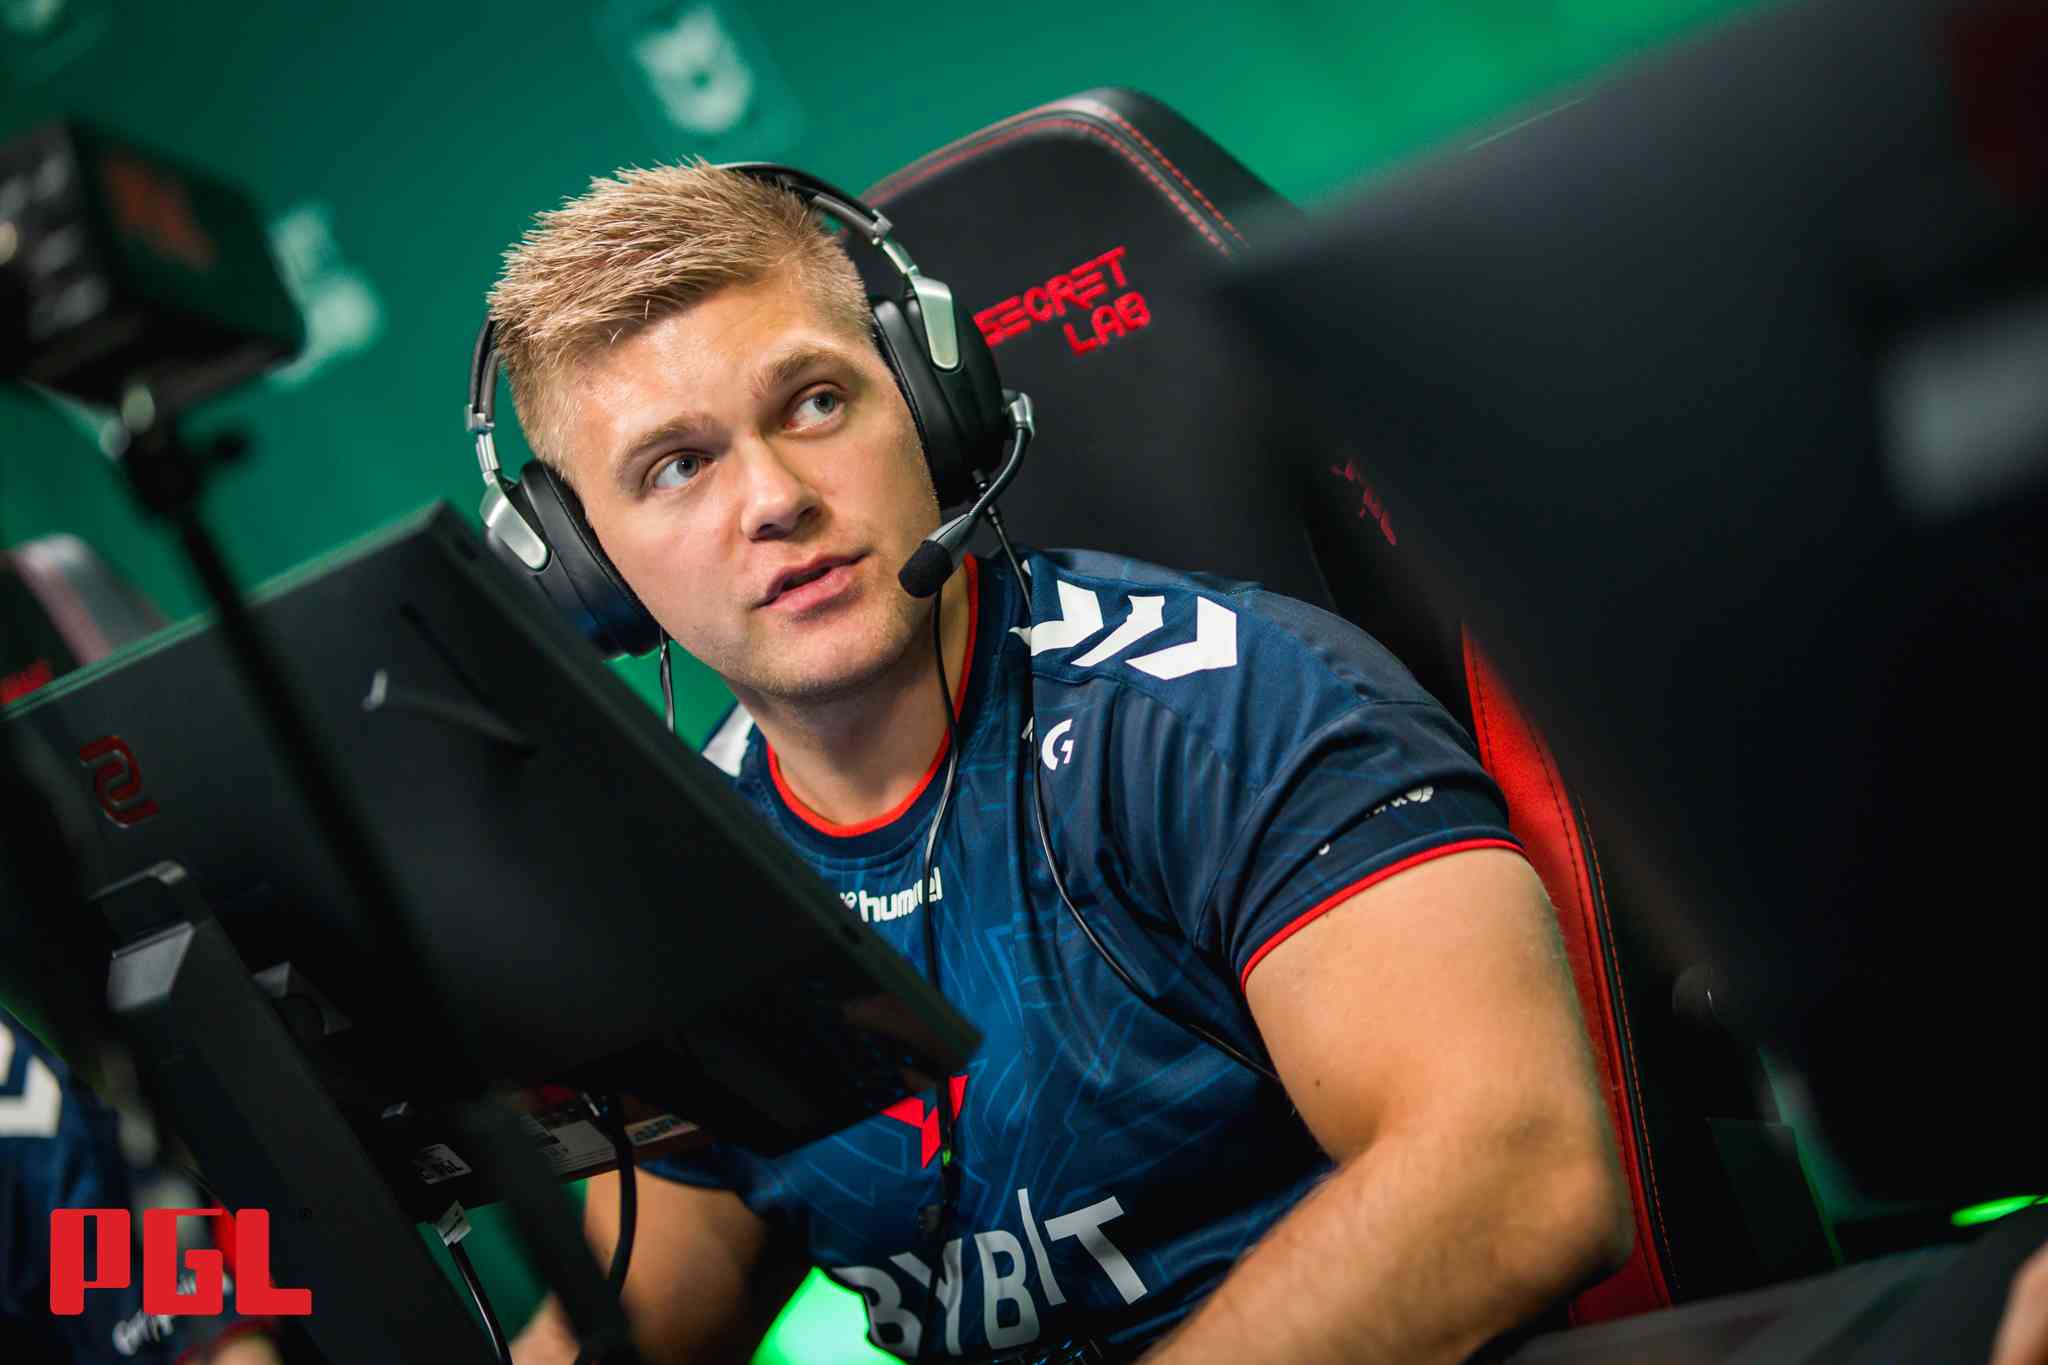 Benjamin "blameF" Bremmer will look to lead Astralis in their first event in the post Lukas "gla1ve" Rossander era (Image Credits: Joao Ferreira/PGL)